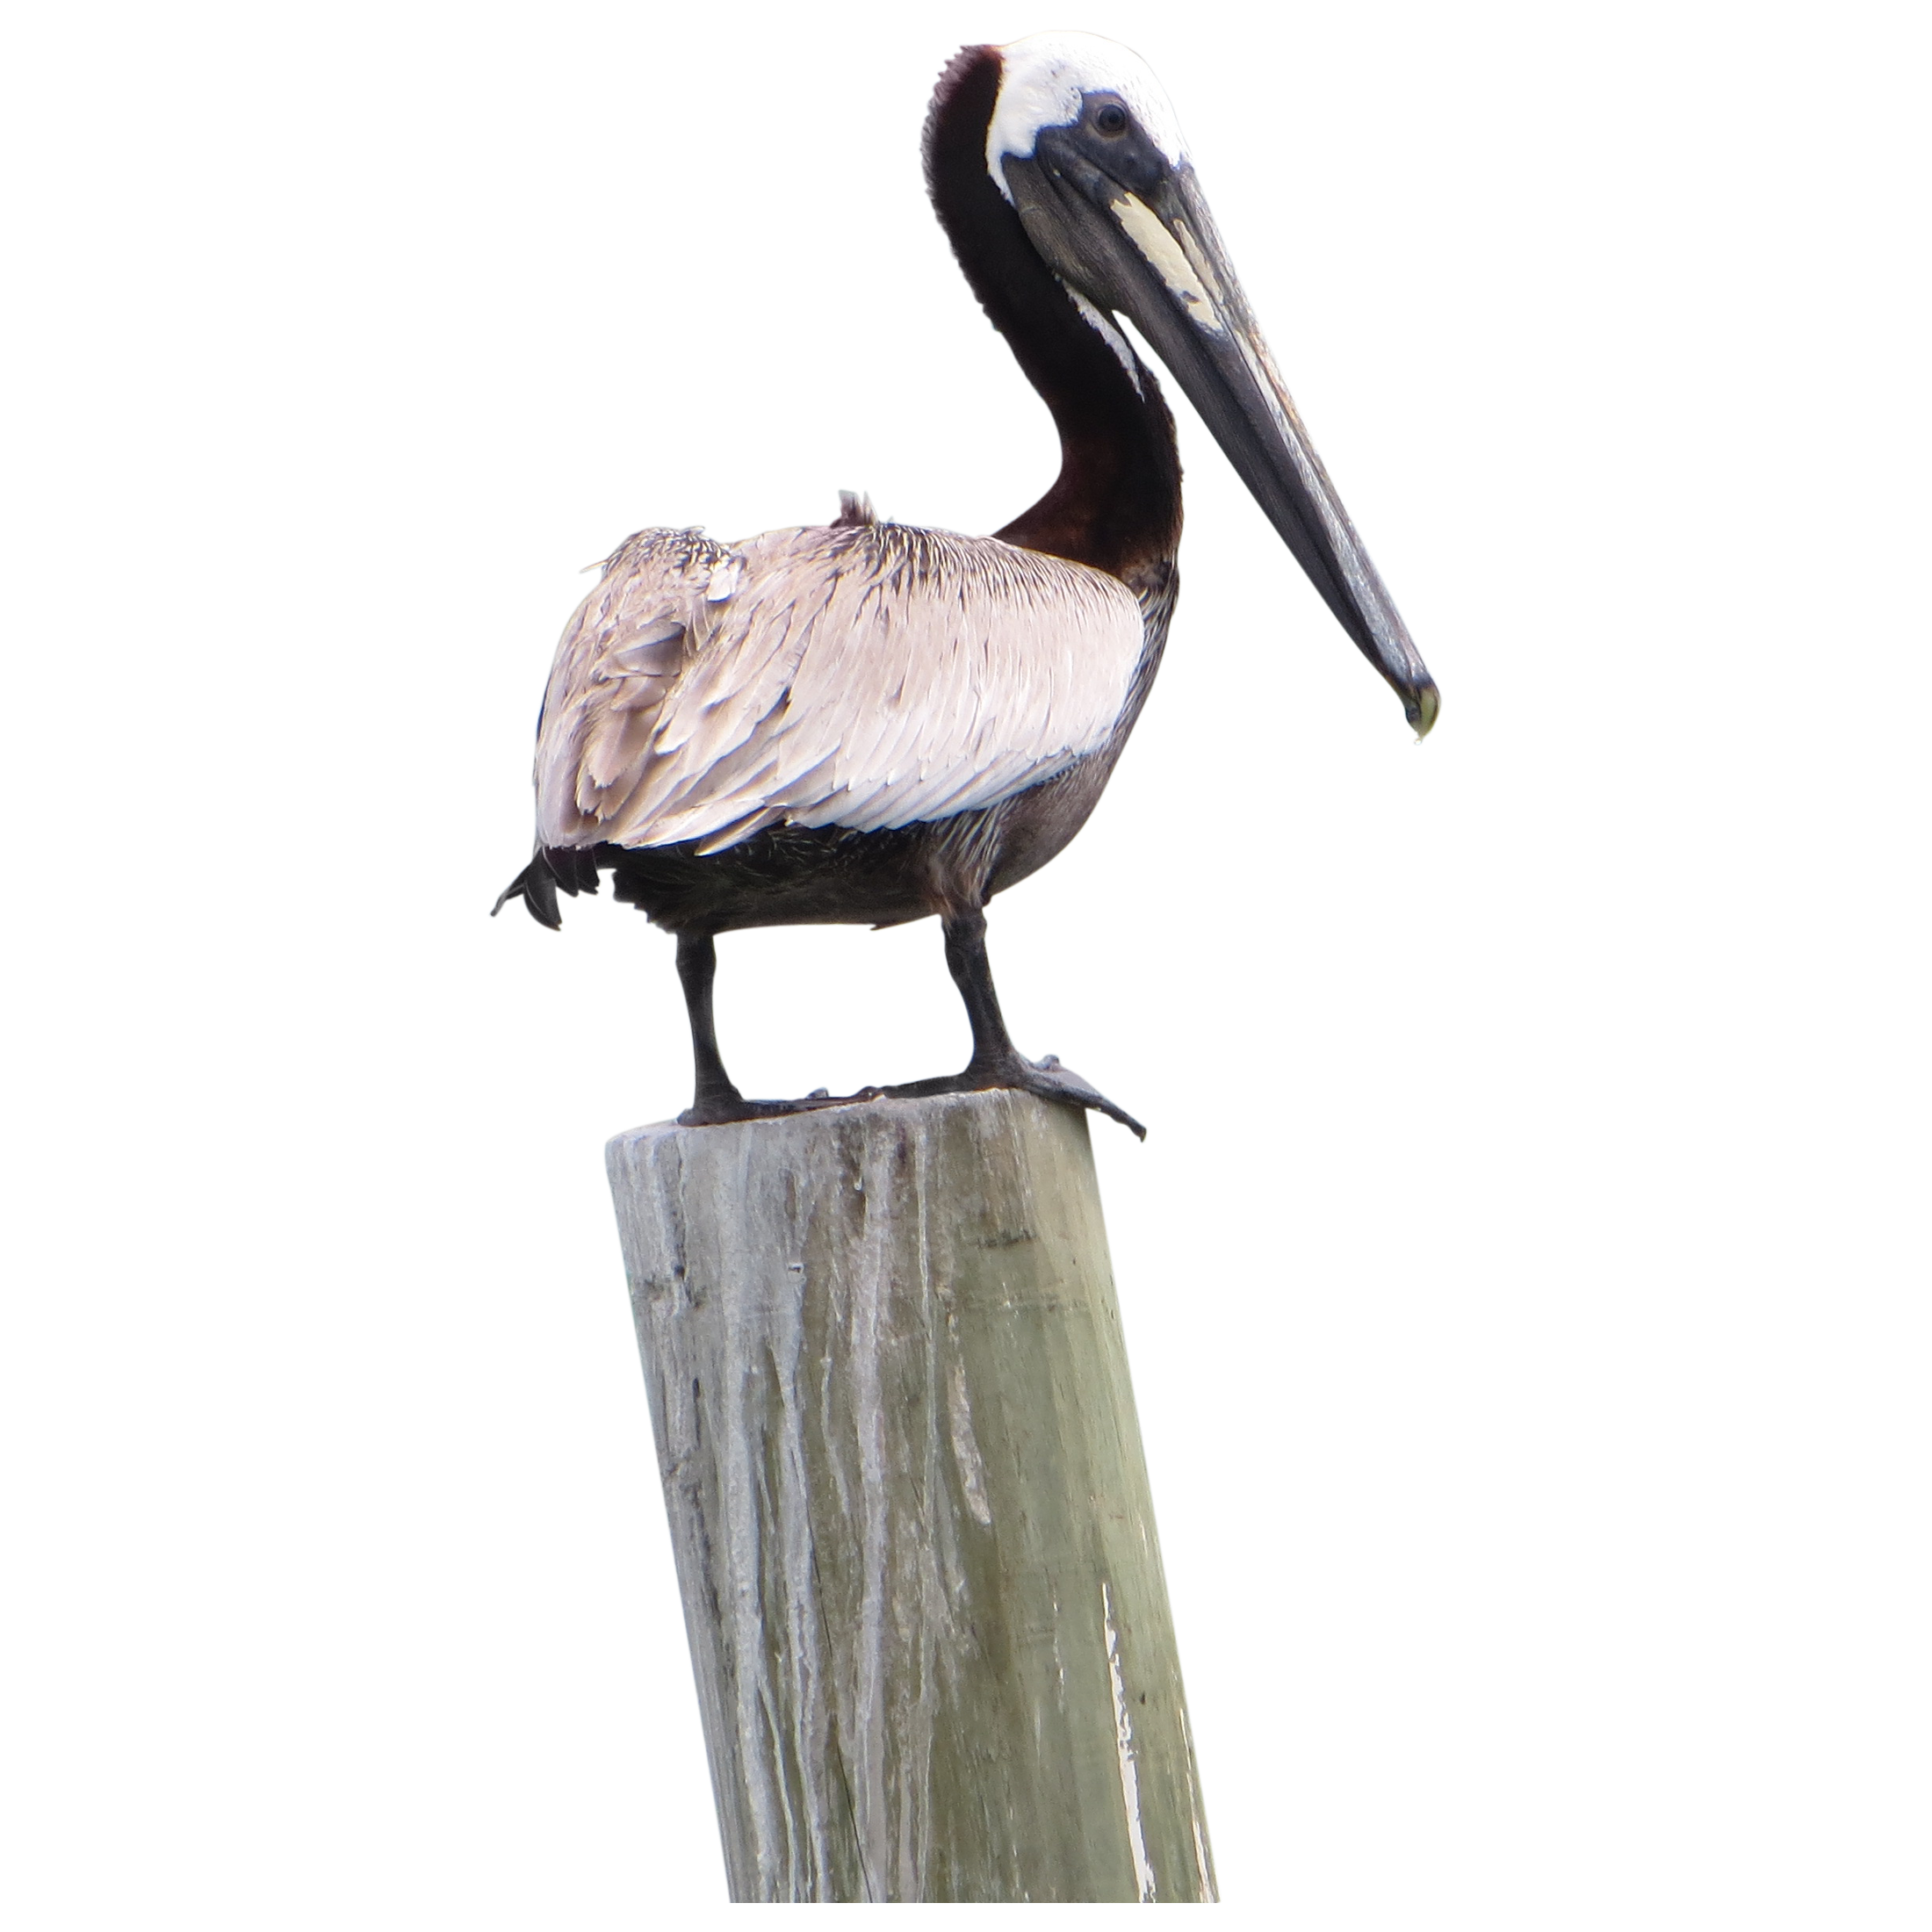 Download Pelican Png Images Transparent Gallery. Advertisement. Advertisement - Pelican, Transparent background PNG HD thumbnail